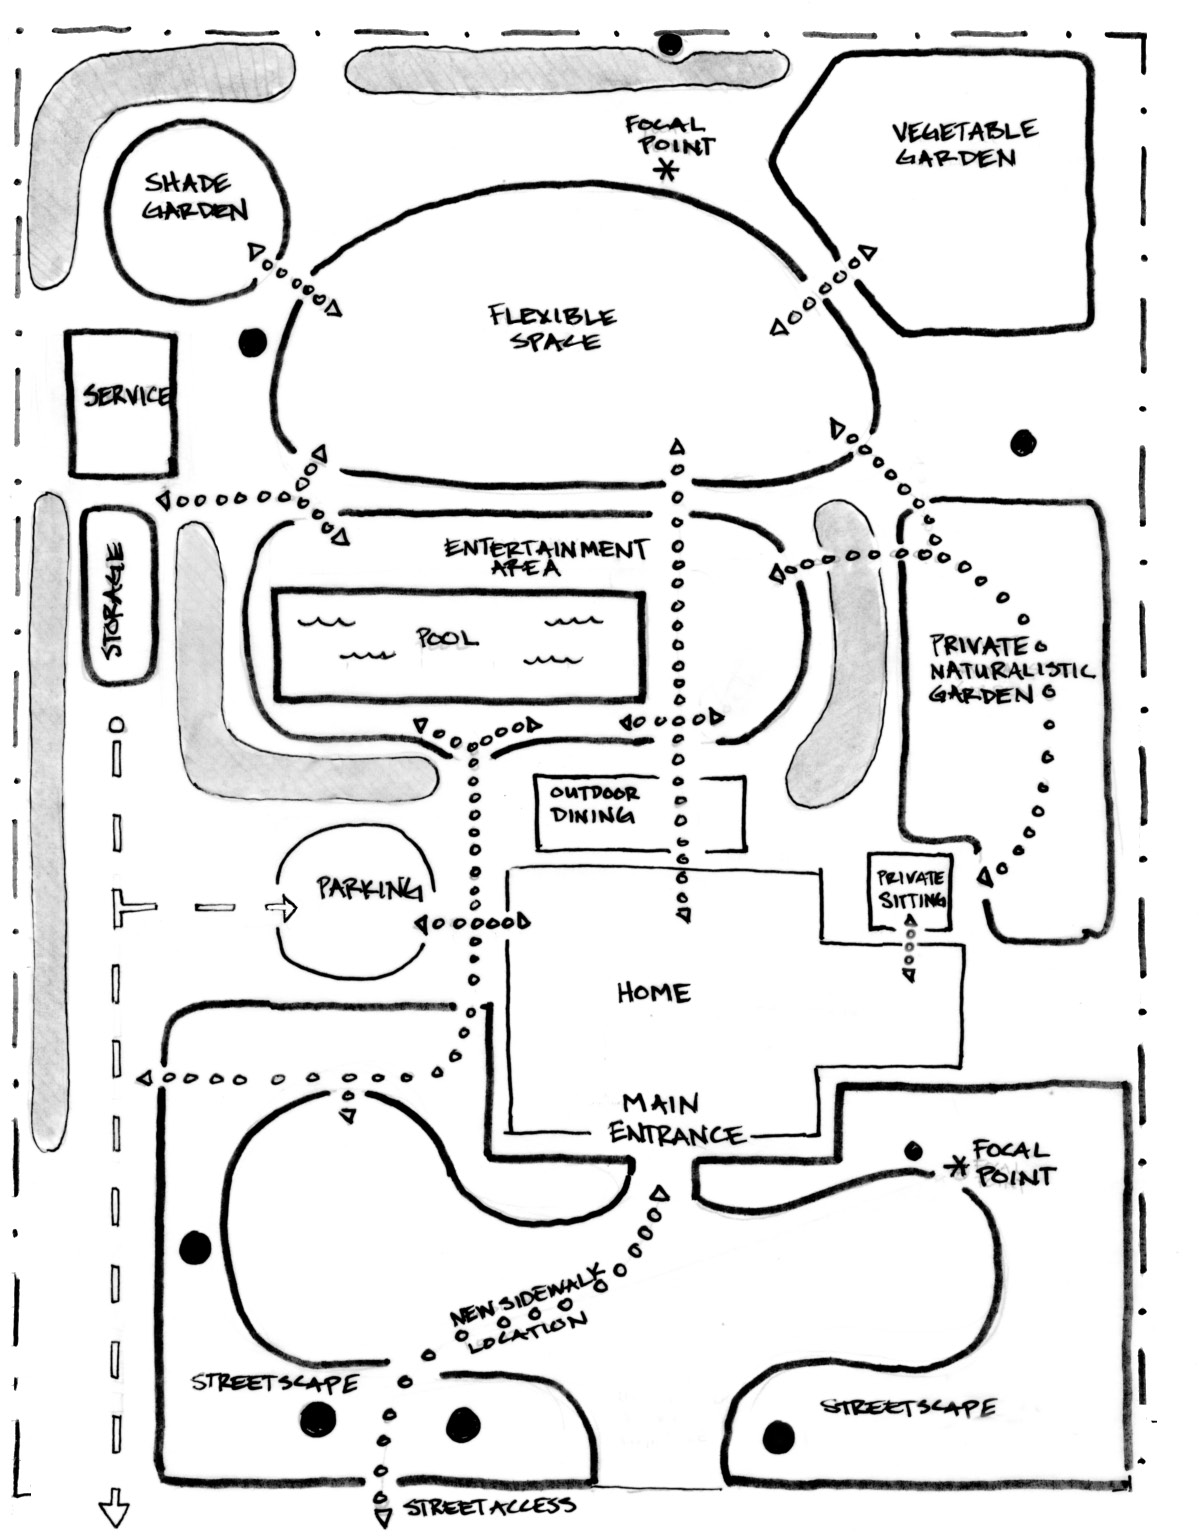 Drawing of an example use area plan, including streetscape, focal points, parking and storage areas, entertainment areas, and various garden areas.